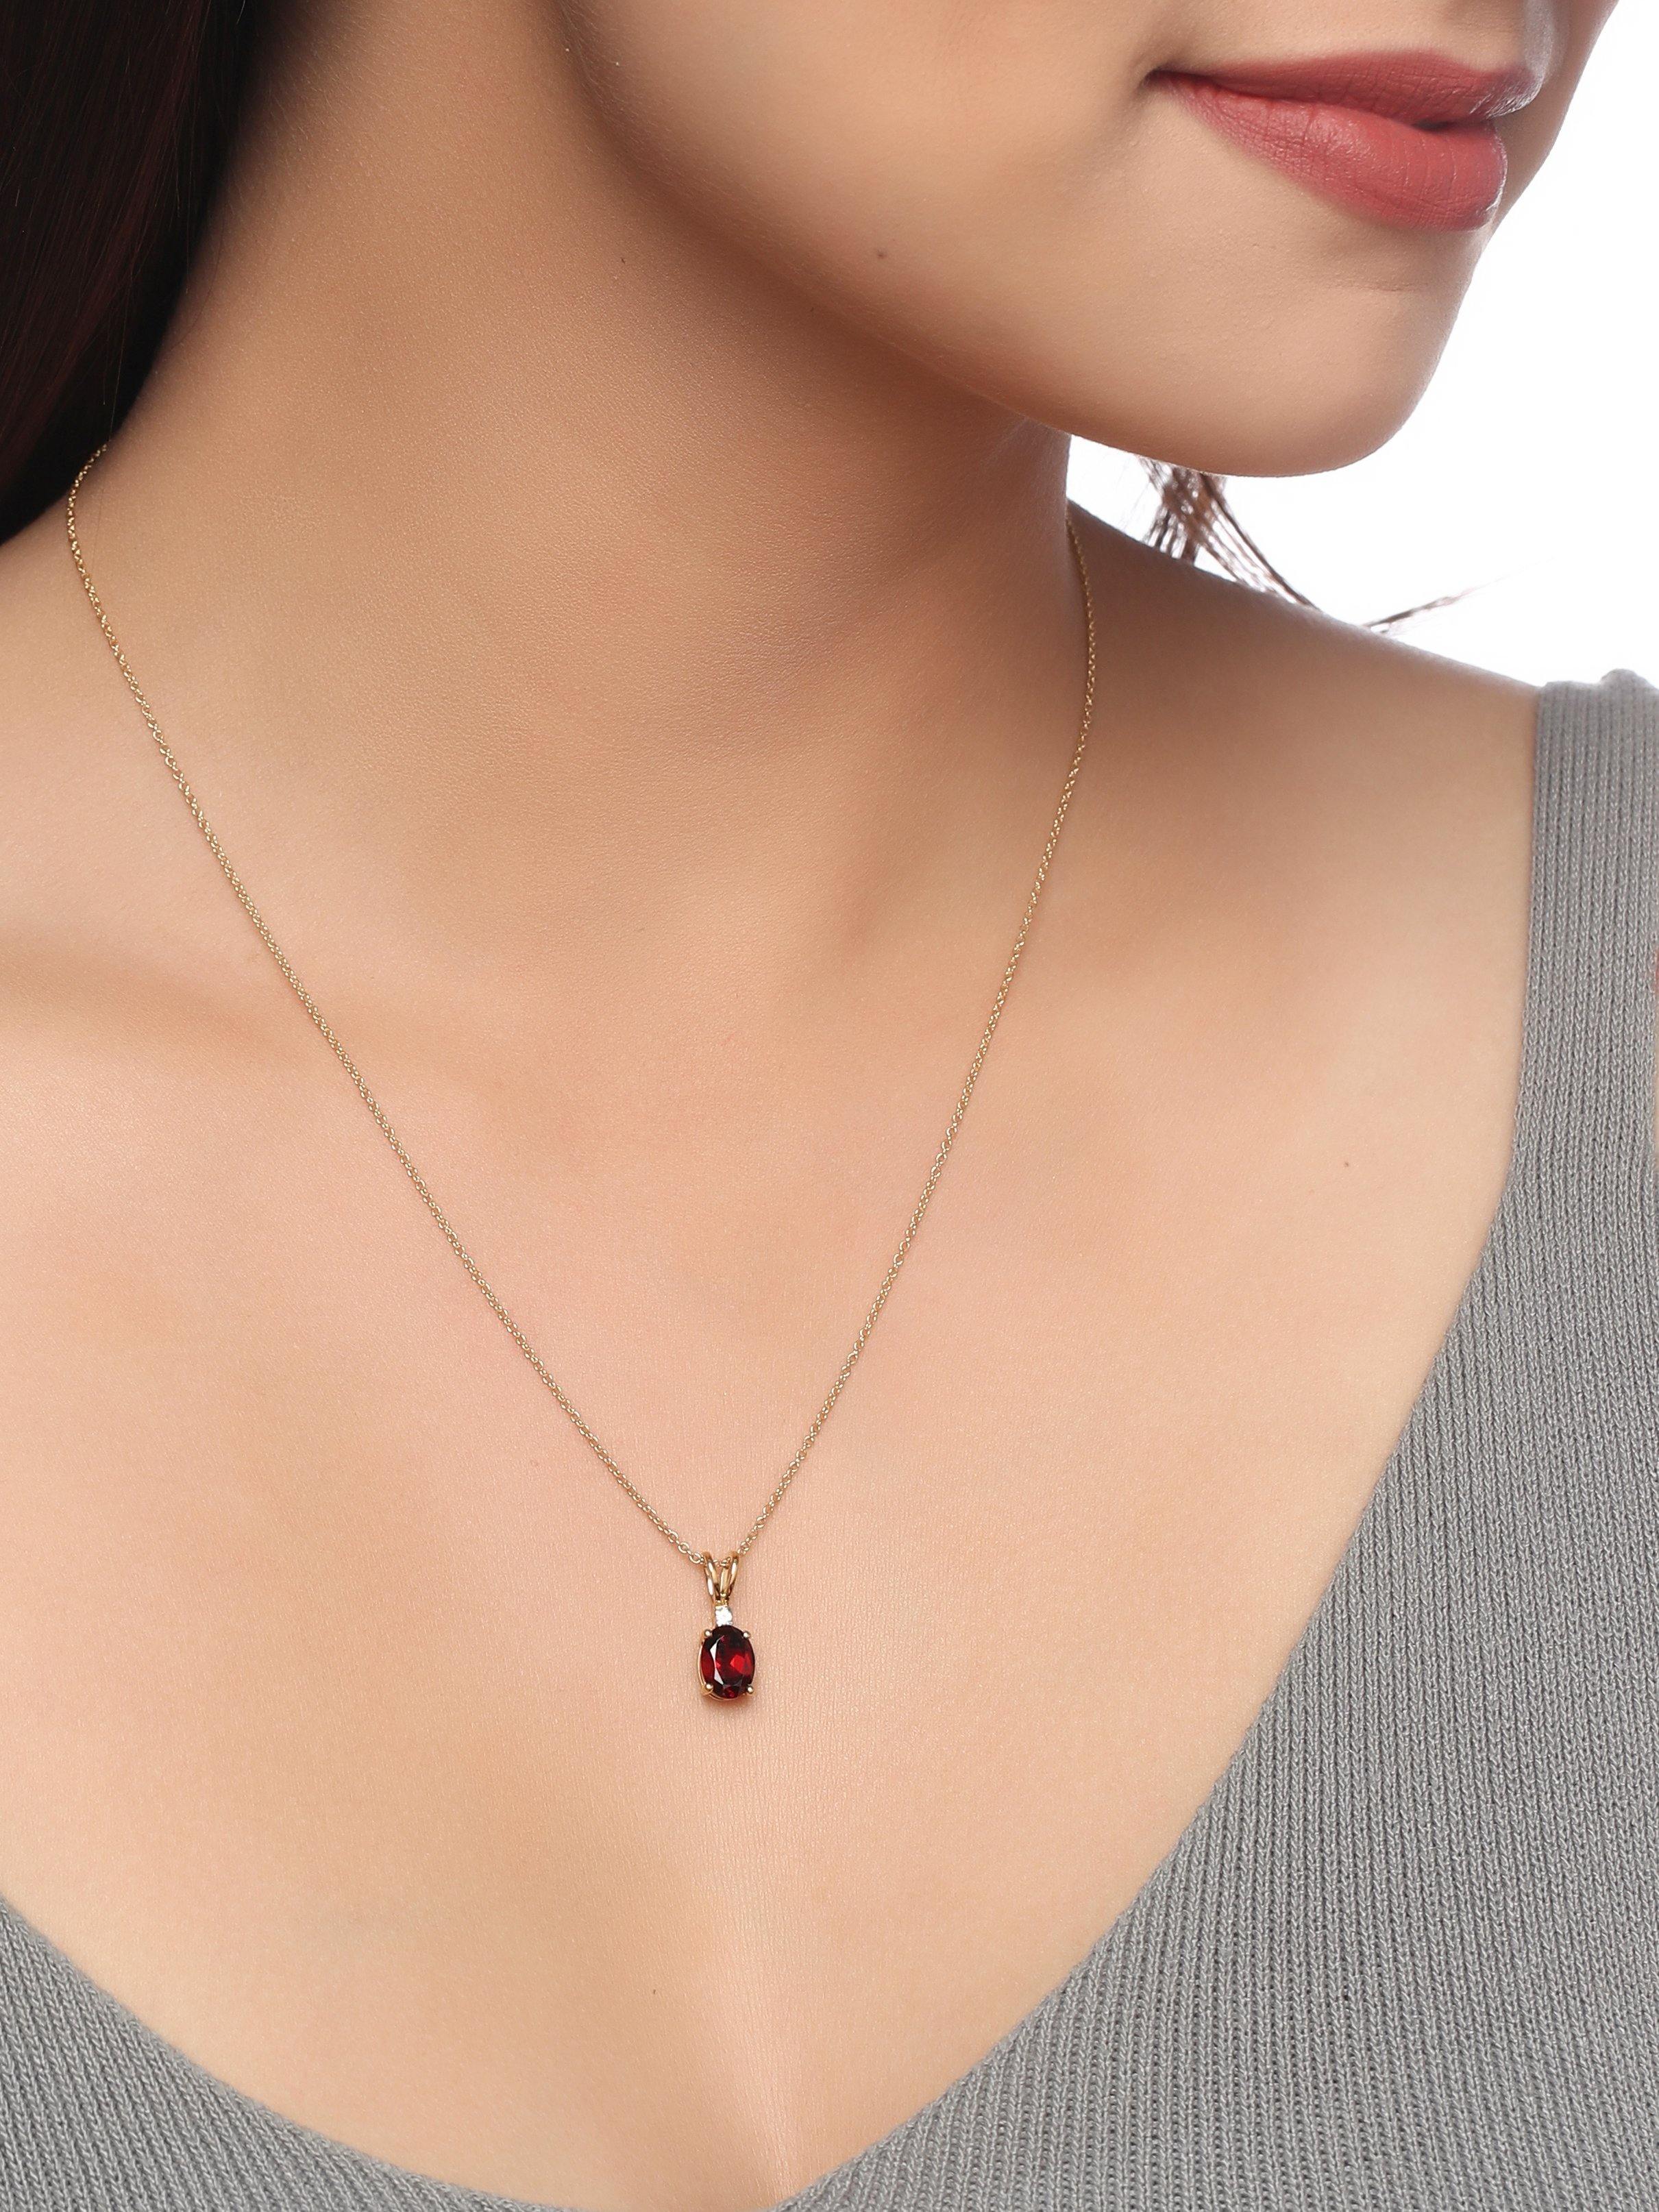 1.42 Ct. Red Garnet Solid 10k Yellow Gold Chain Pendant Necklace Jewelry - YoTreasure